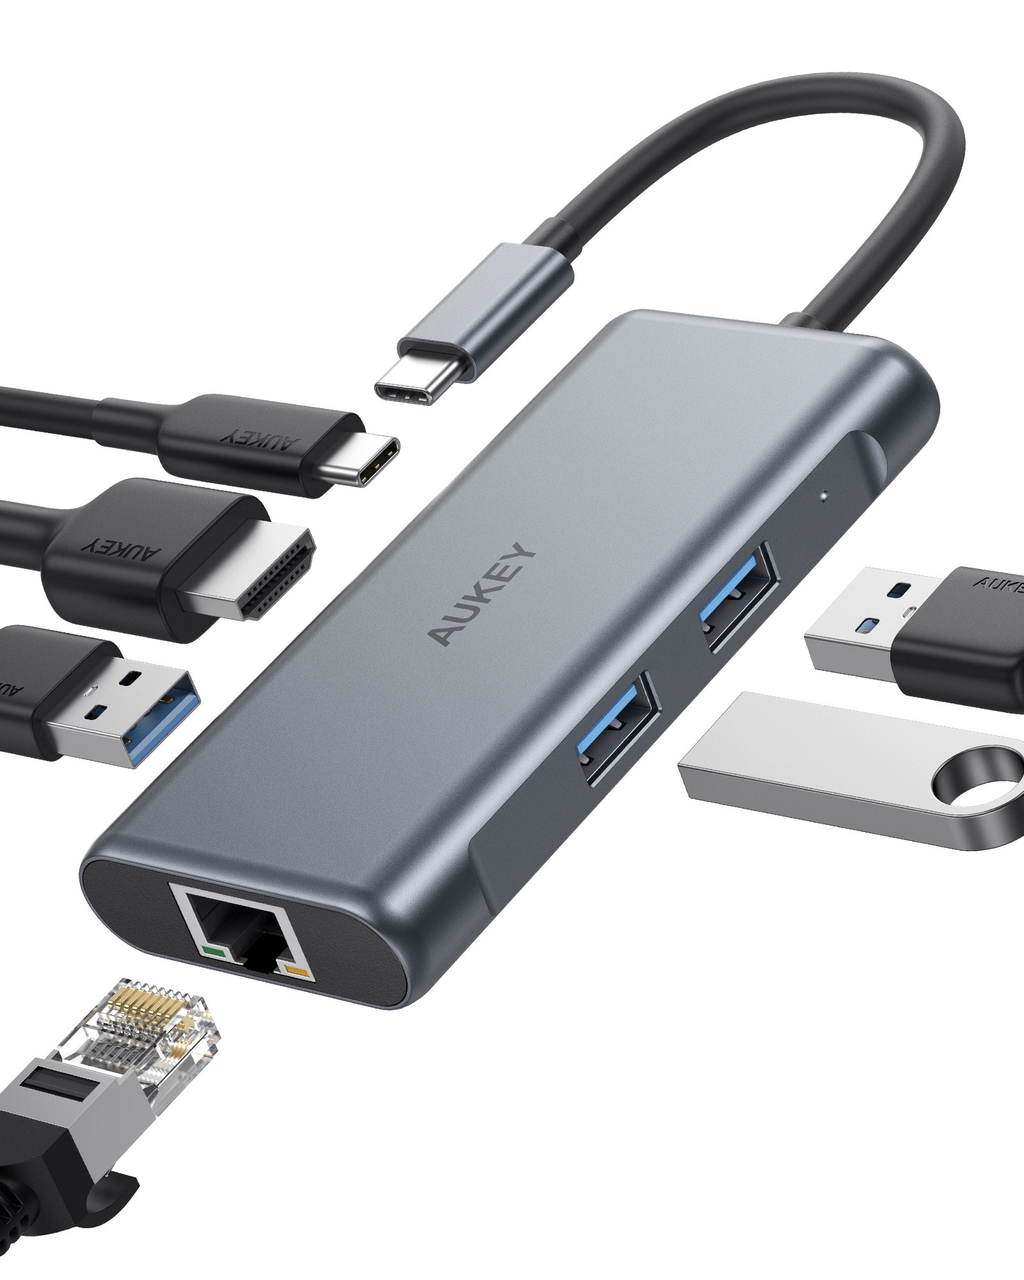 Hands-on: Aukey's USB-C Ethernet and USB Hub - a solid MacBook